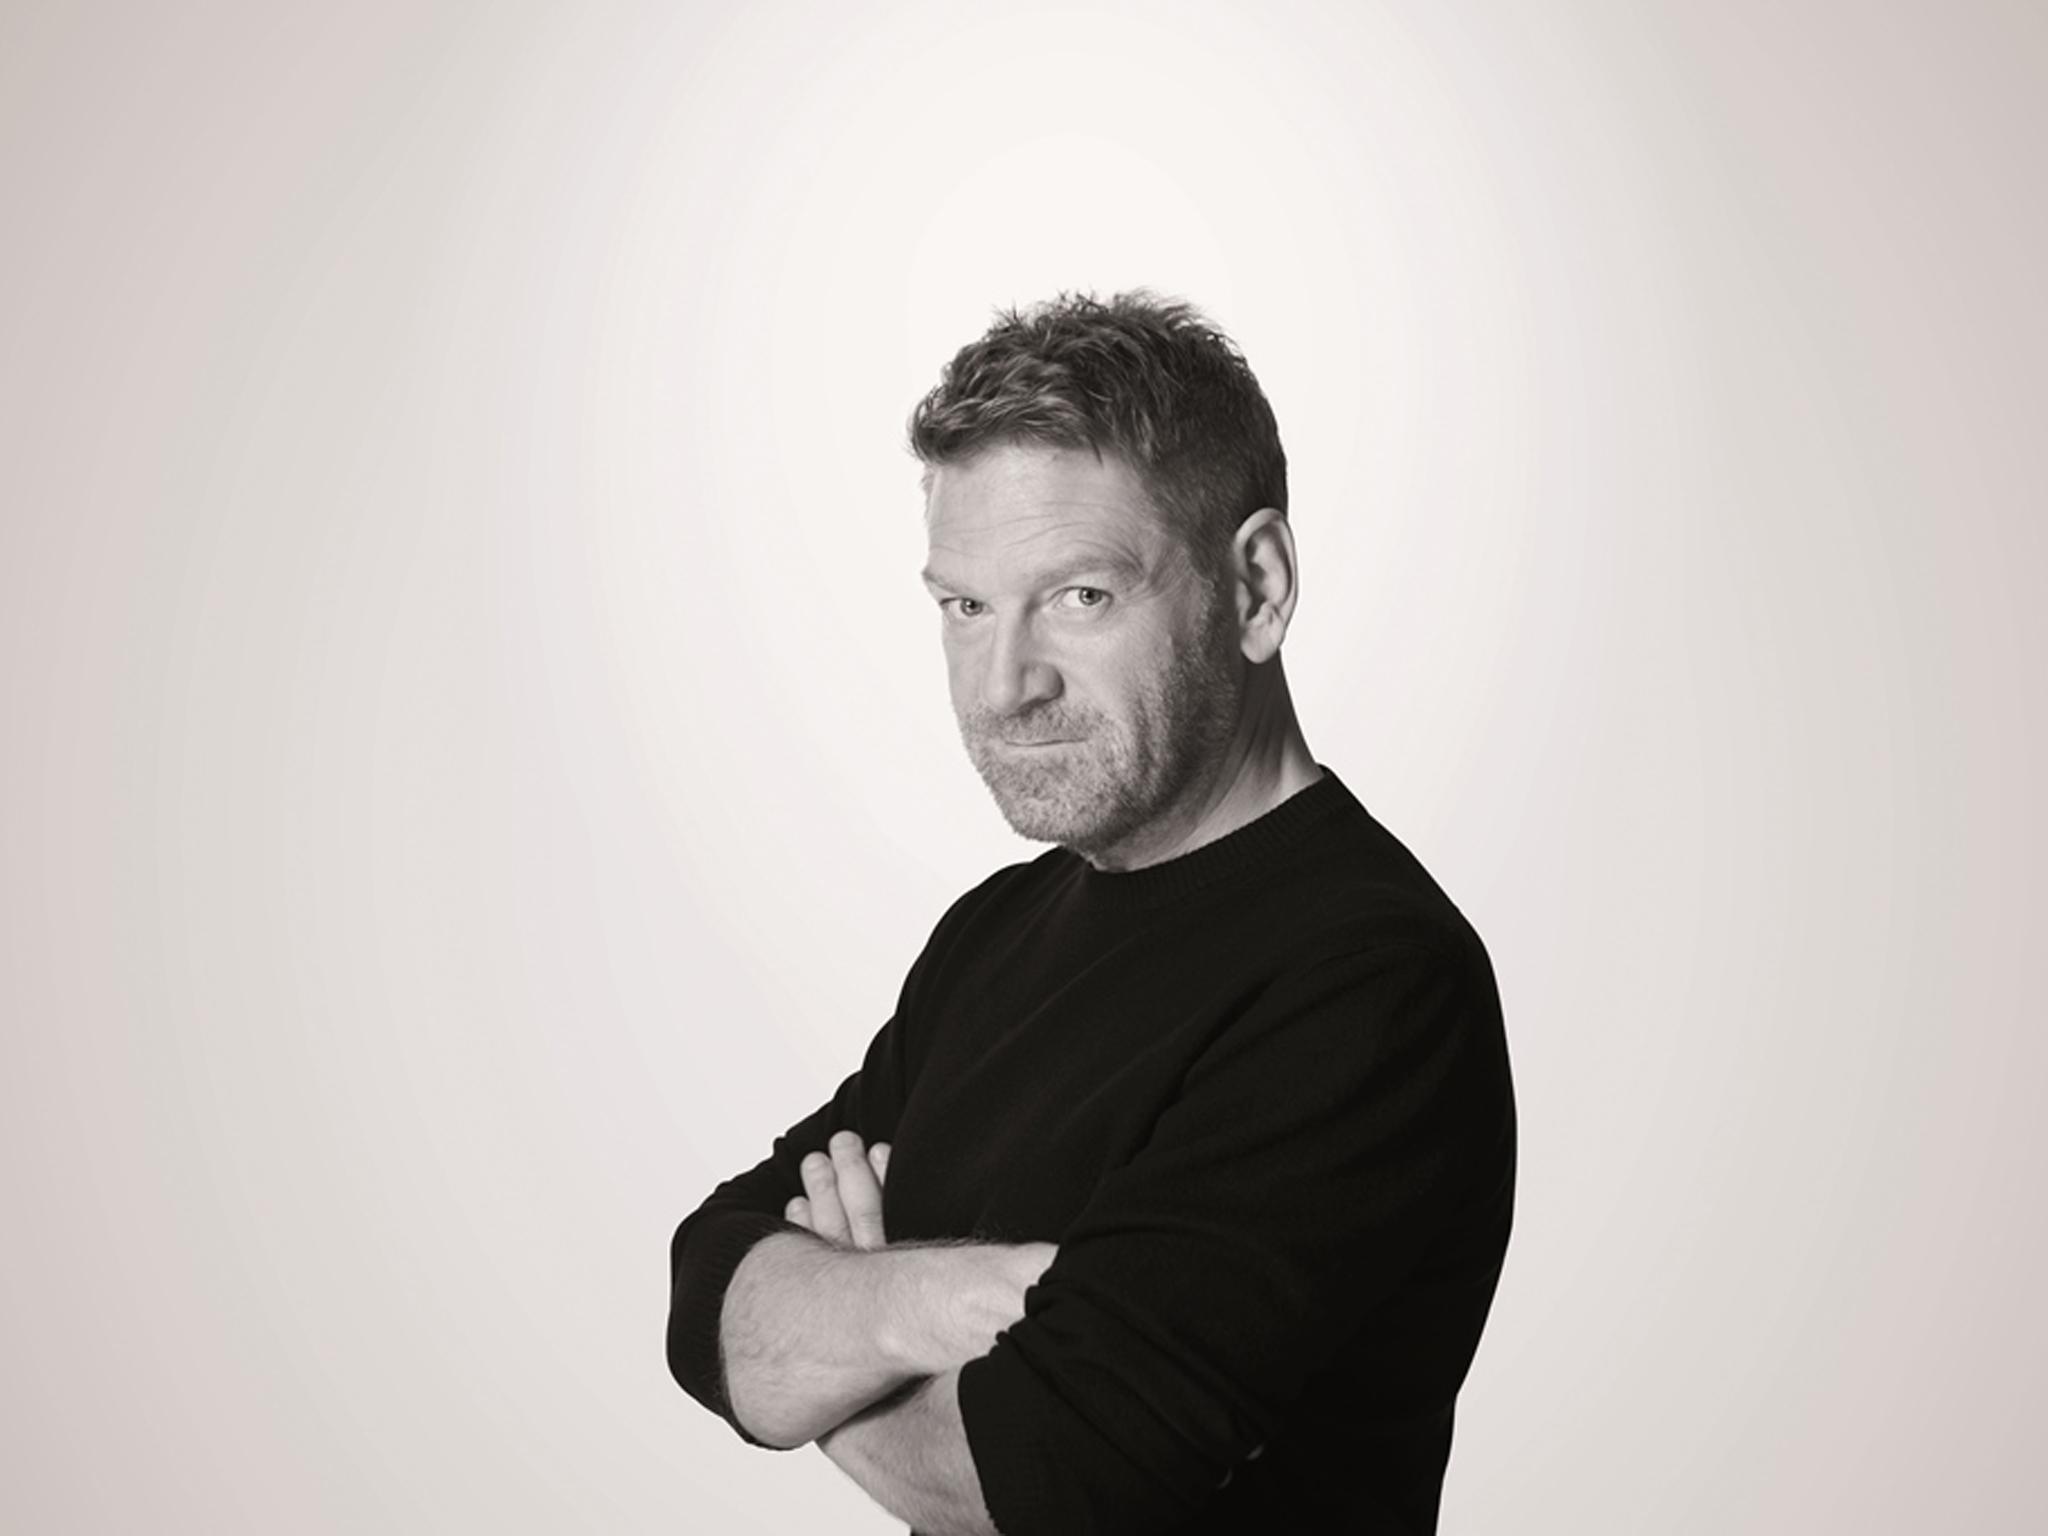 Monochrome Kenneth Branagh Wallpapers 58026 2048x1536px